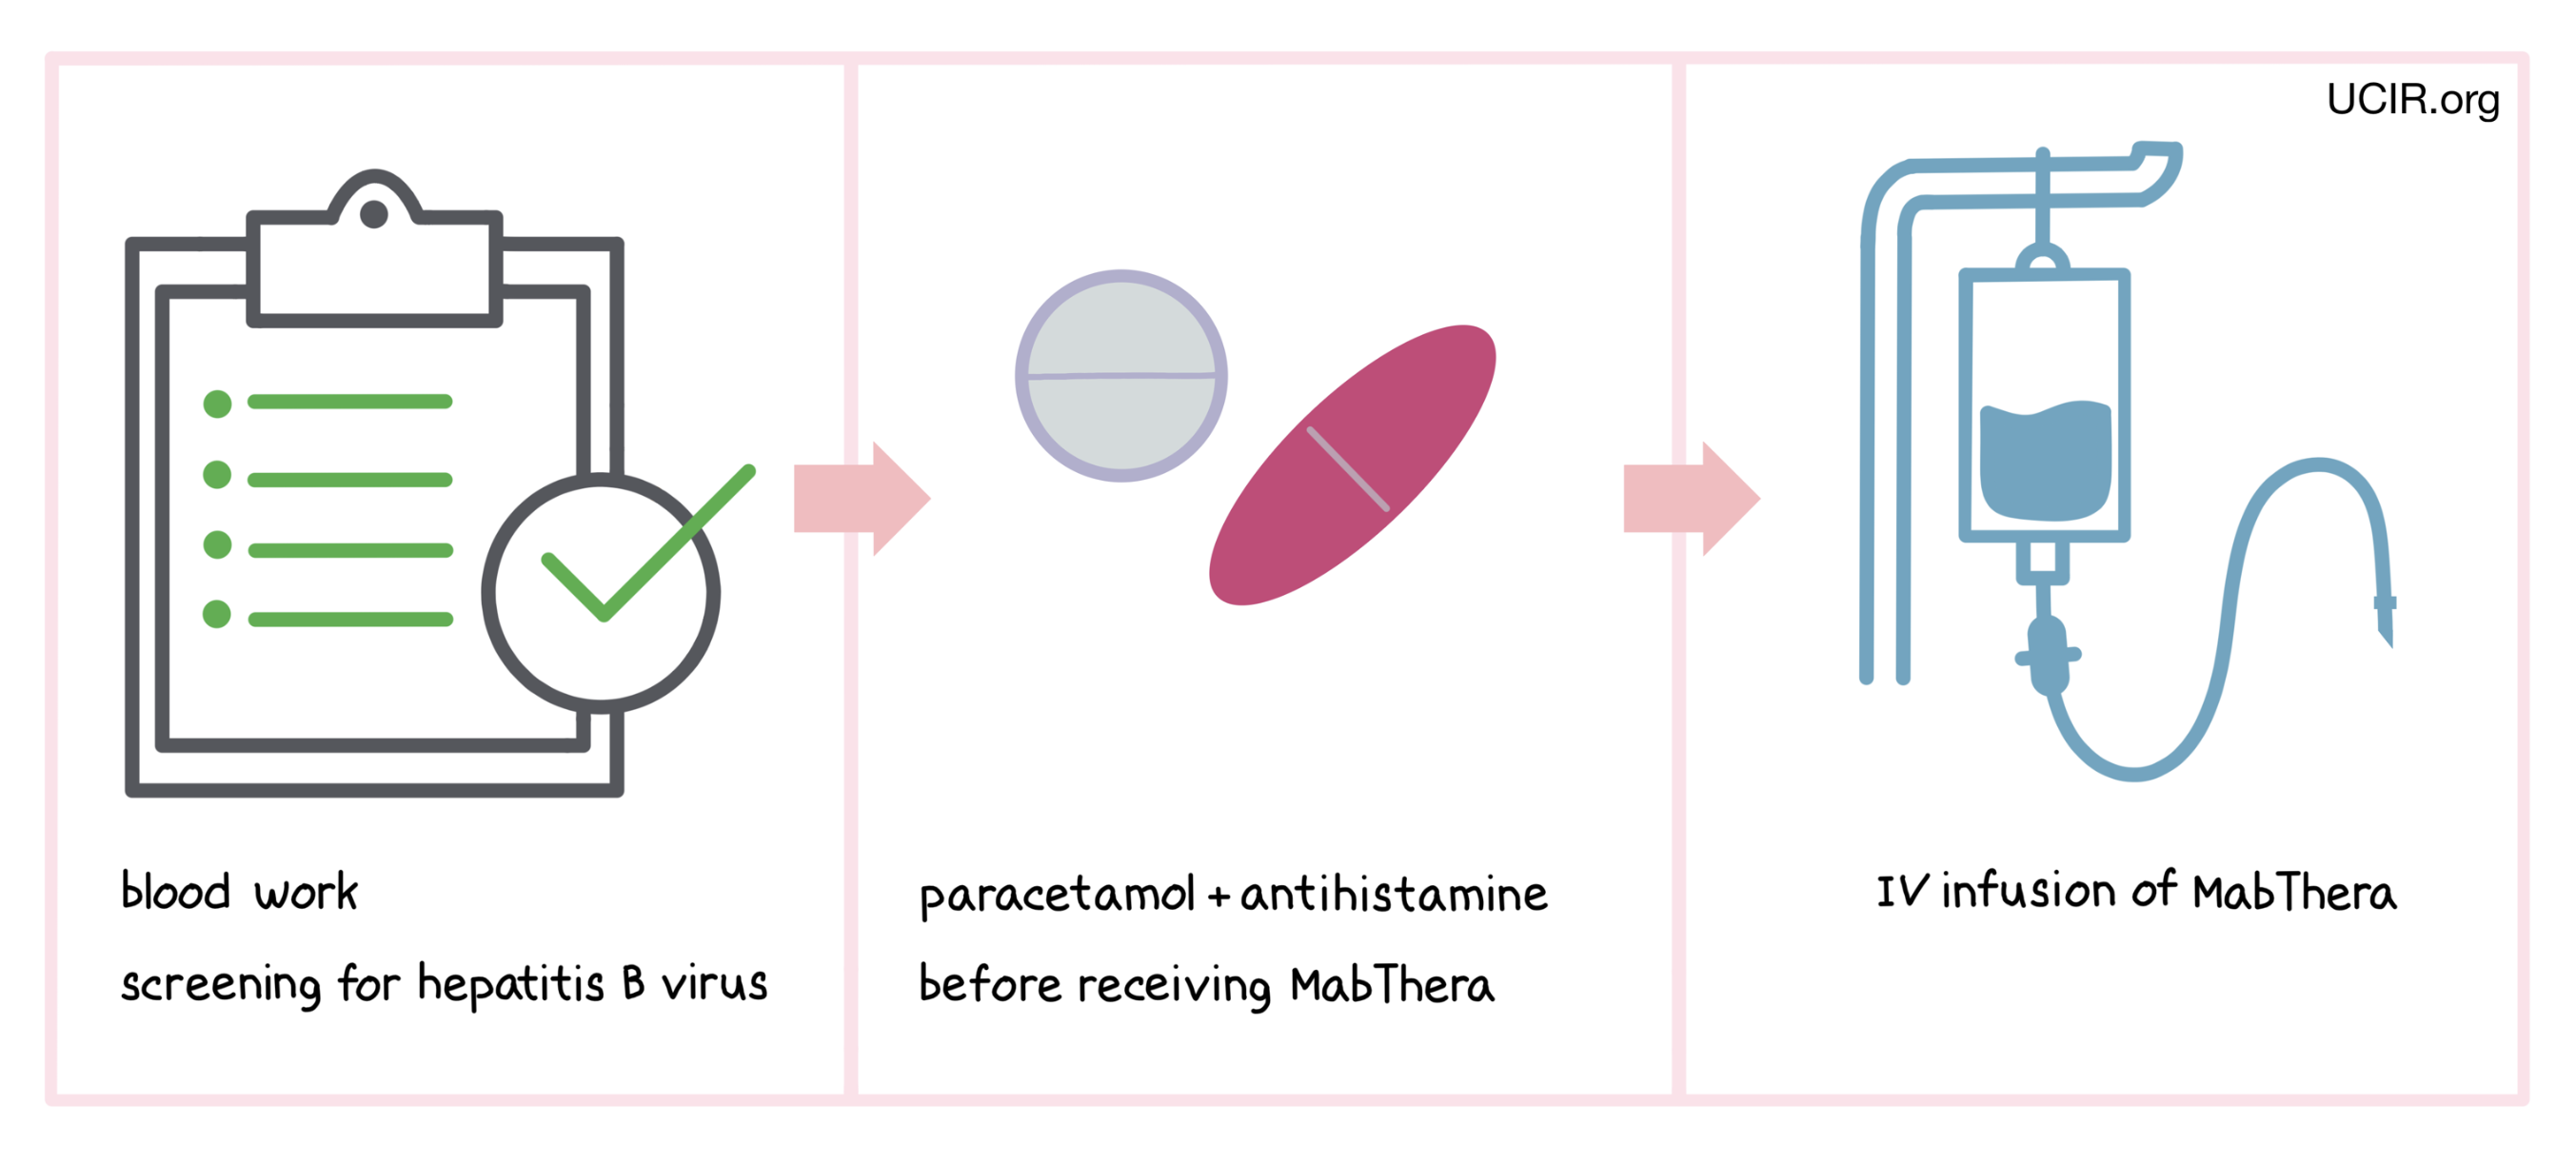 Illustration showing how MabThera is administered to patients